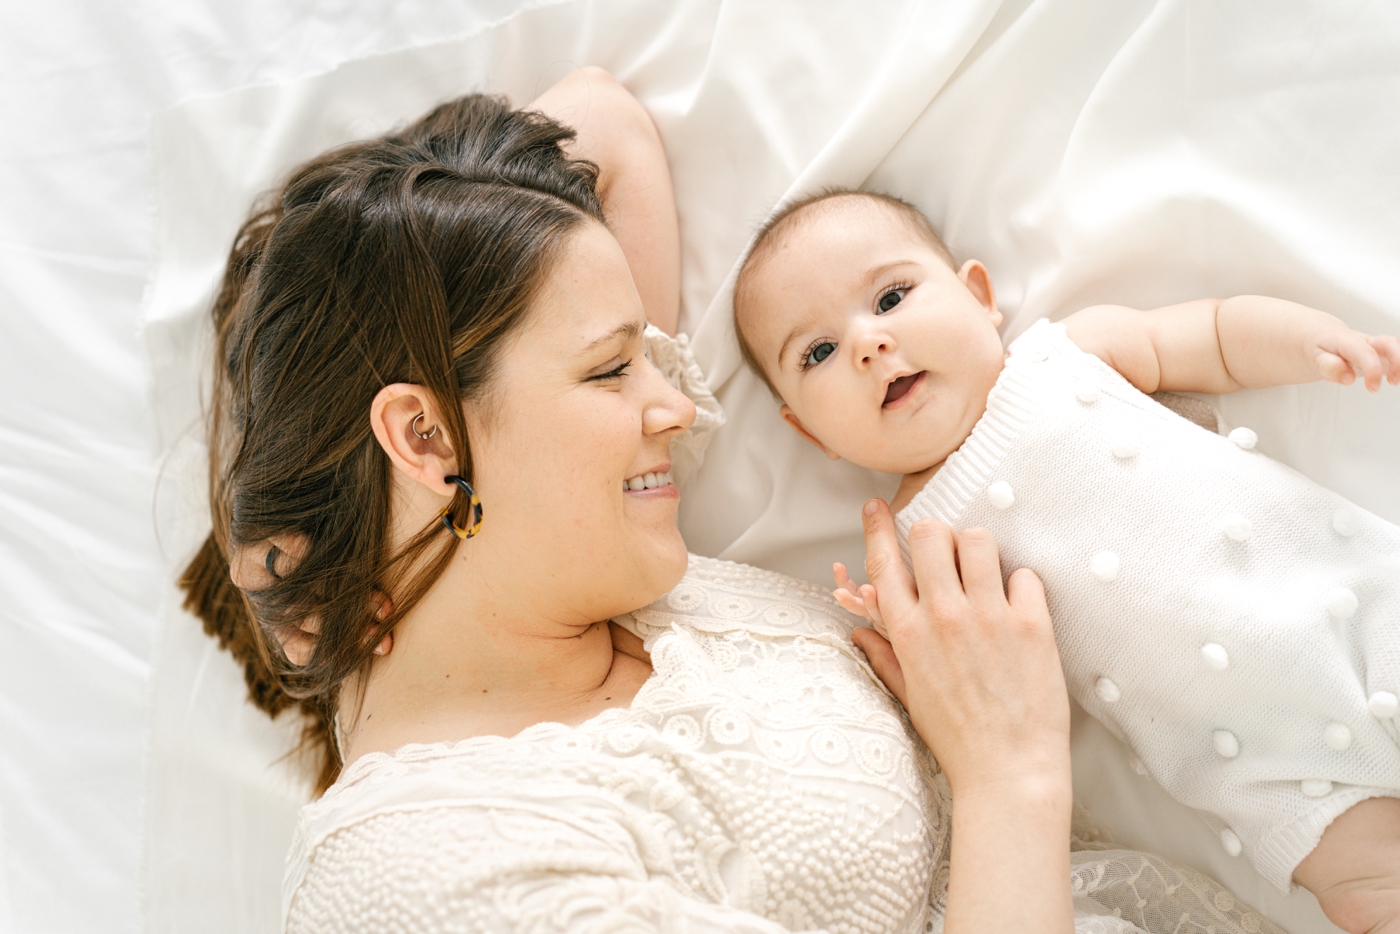 Mom laying next to baby during milestone session in studio. Photo by Lauren Sosler Photography.